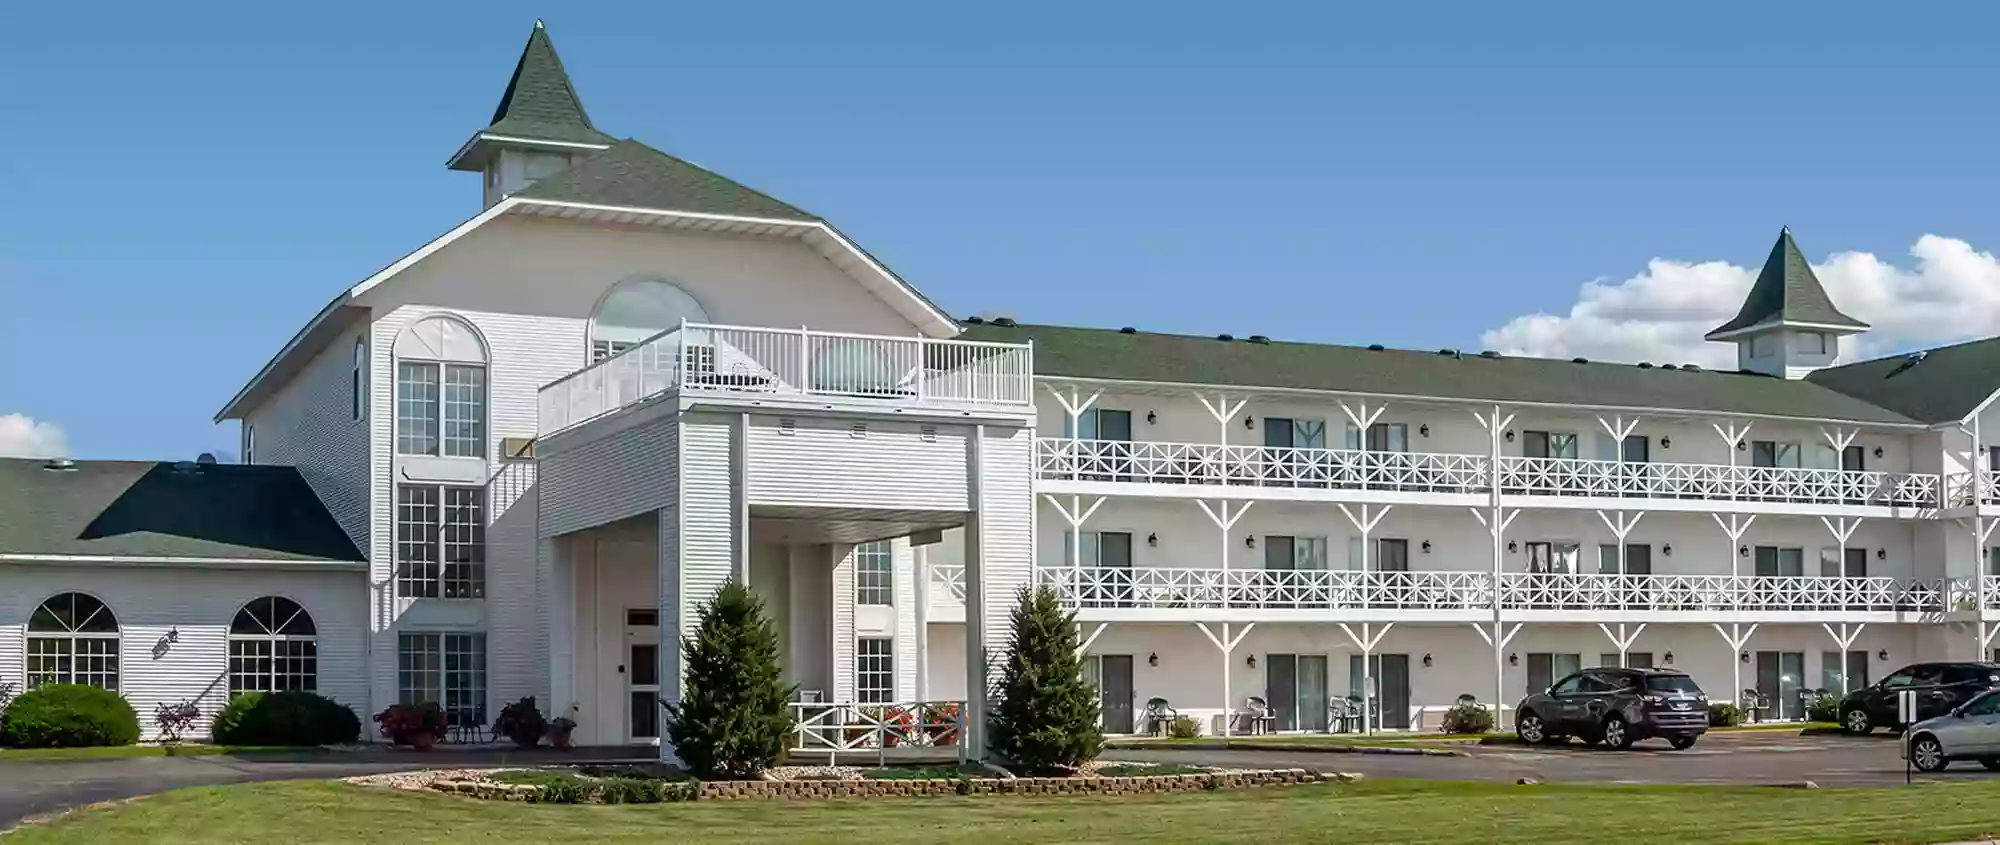 Wintergreen Conference Center and Clarion Hotel & Suites